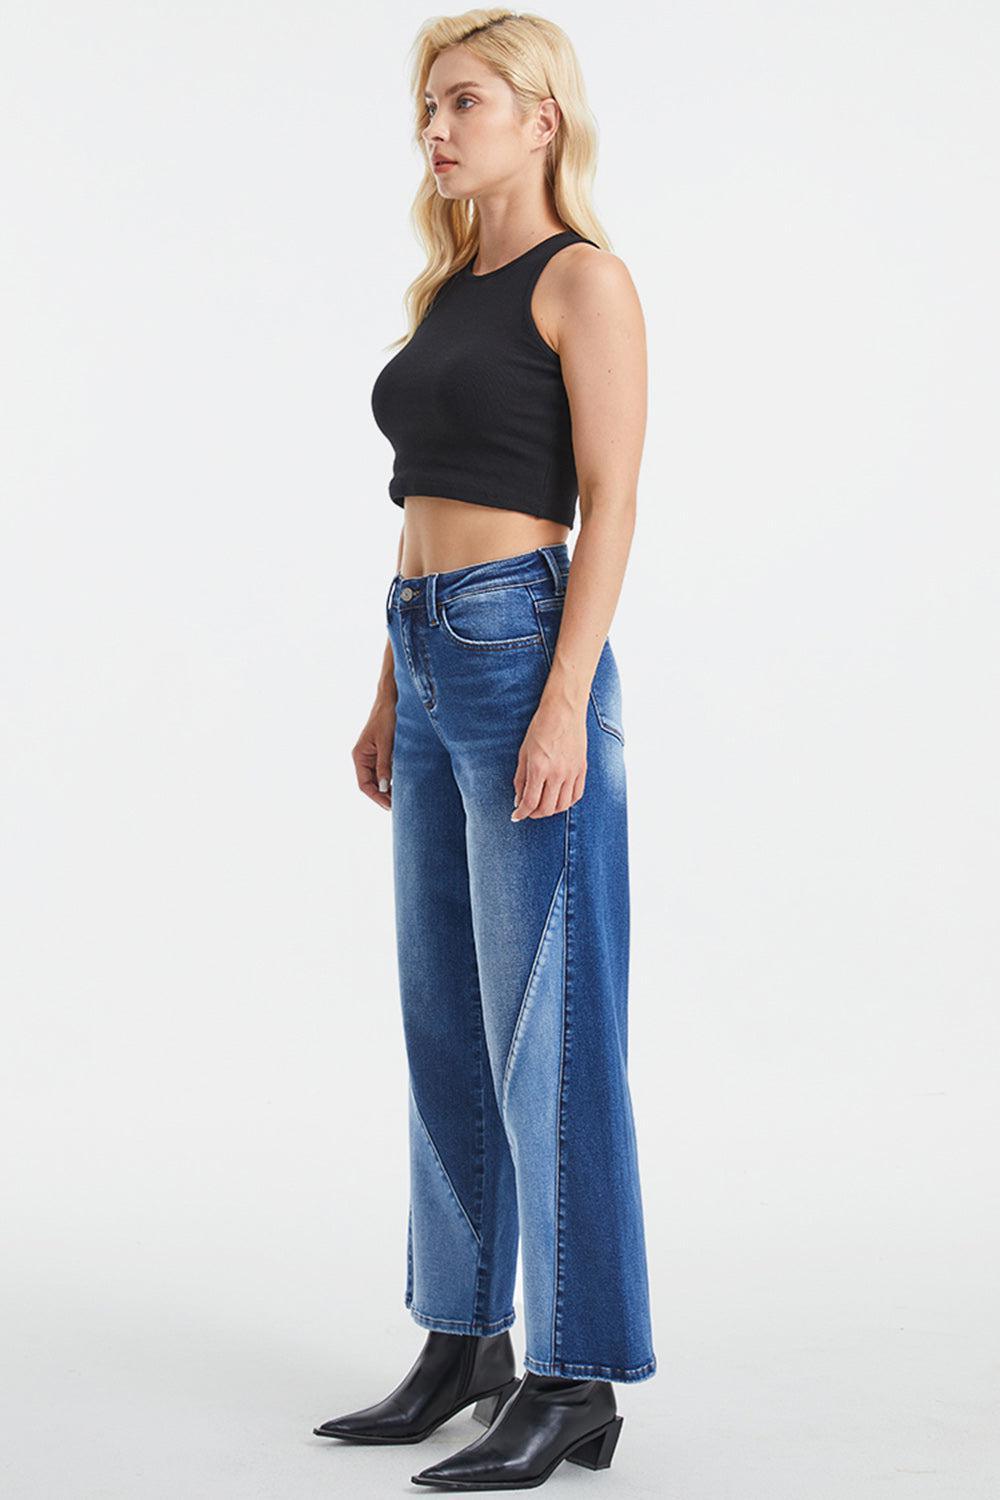 a woman in a black crop top and jeans